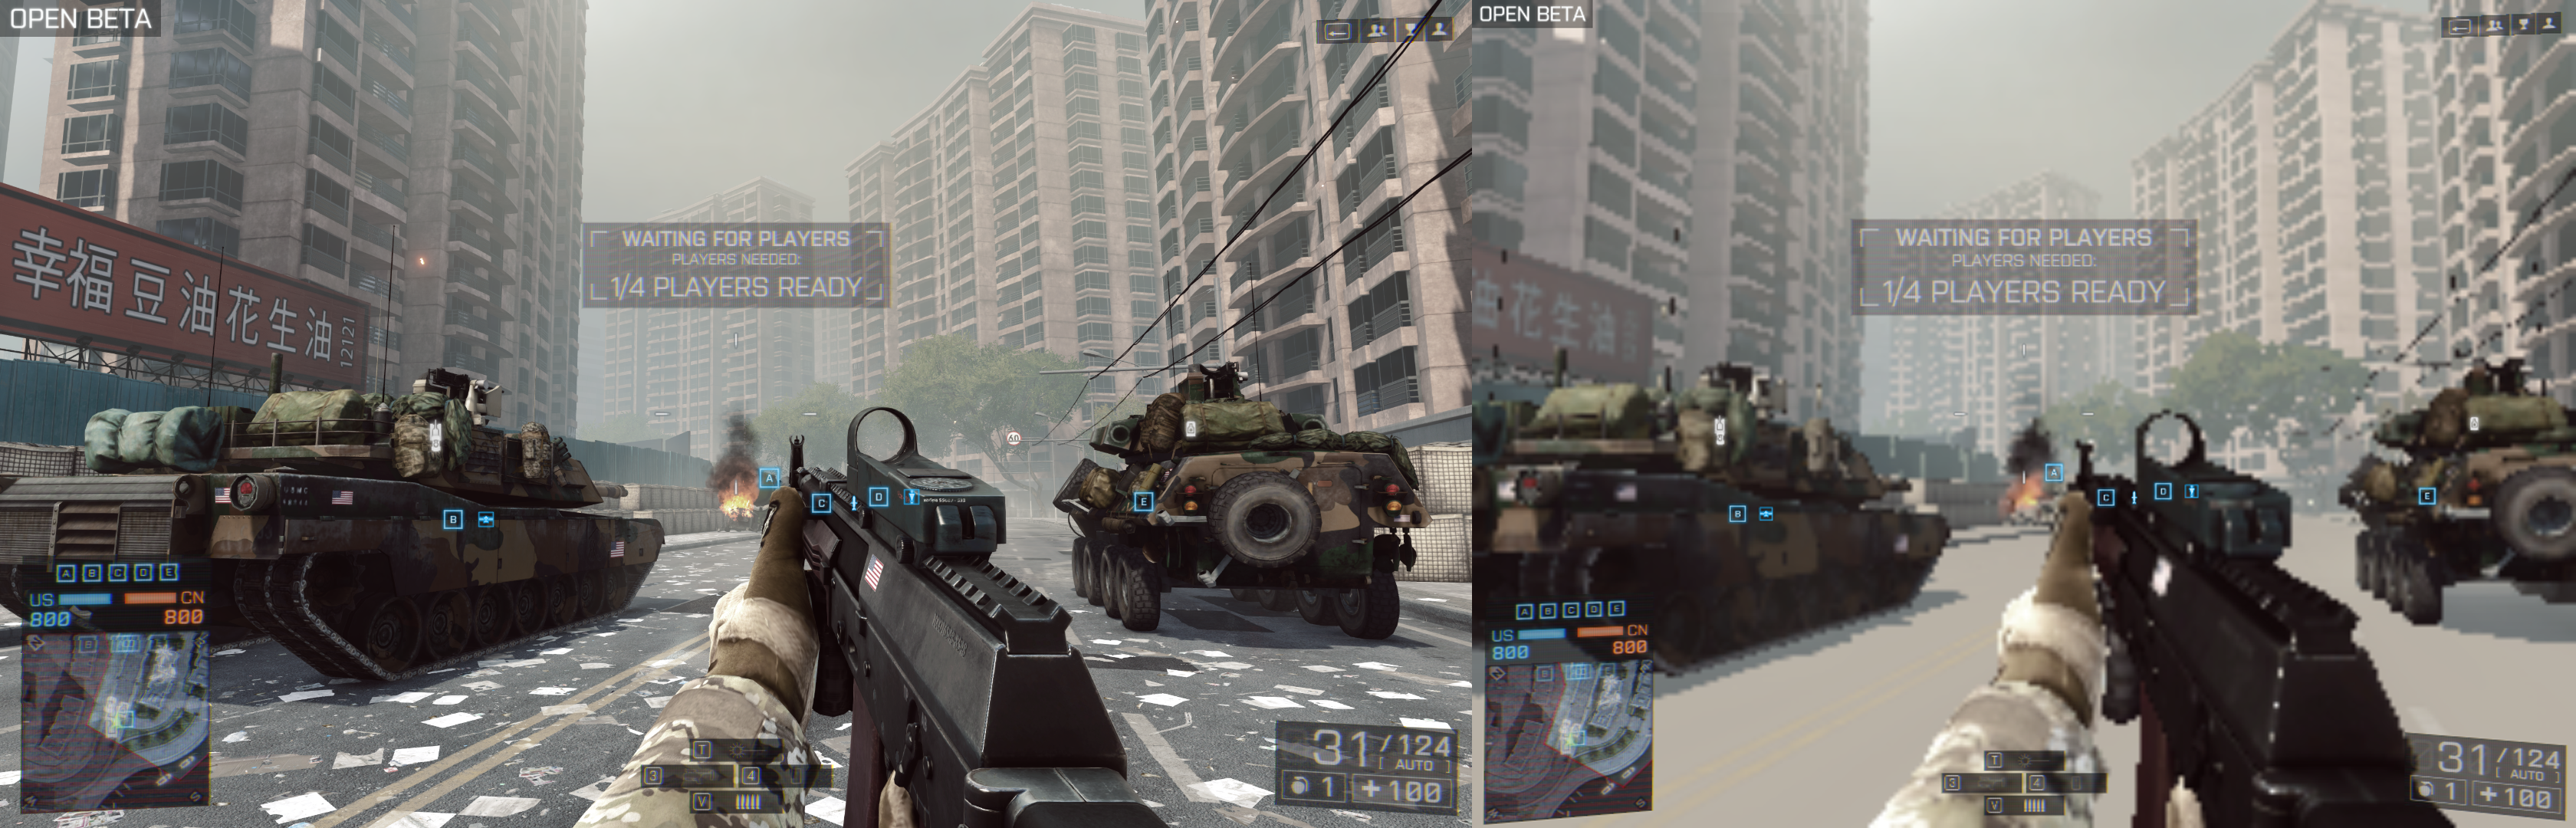 Battlefield4_Scalable_002